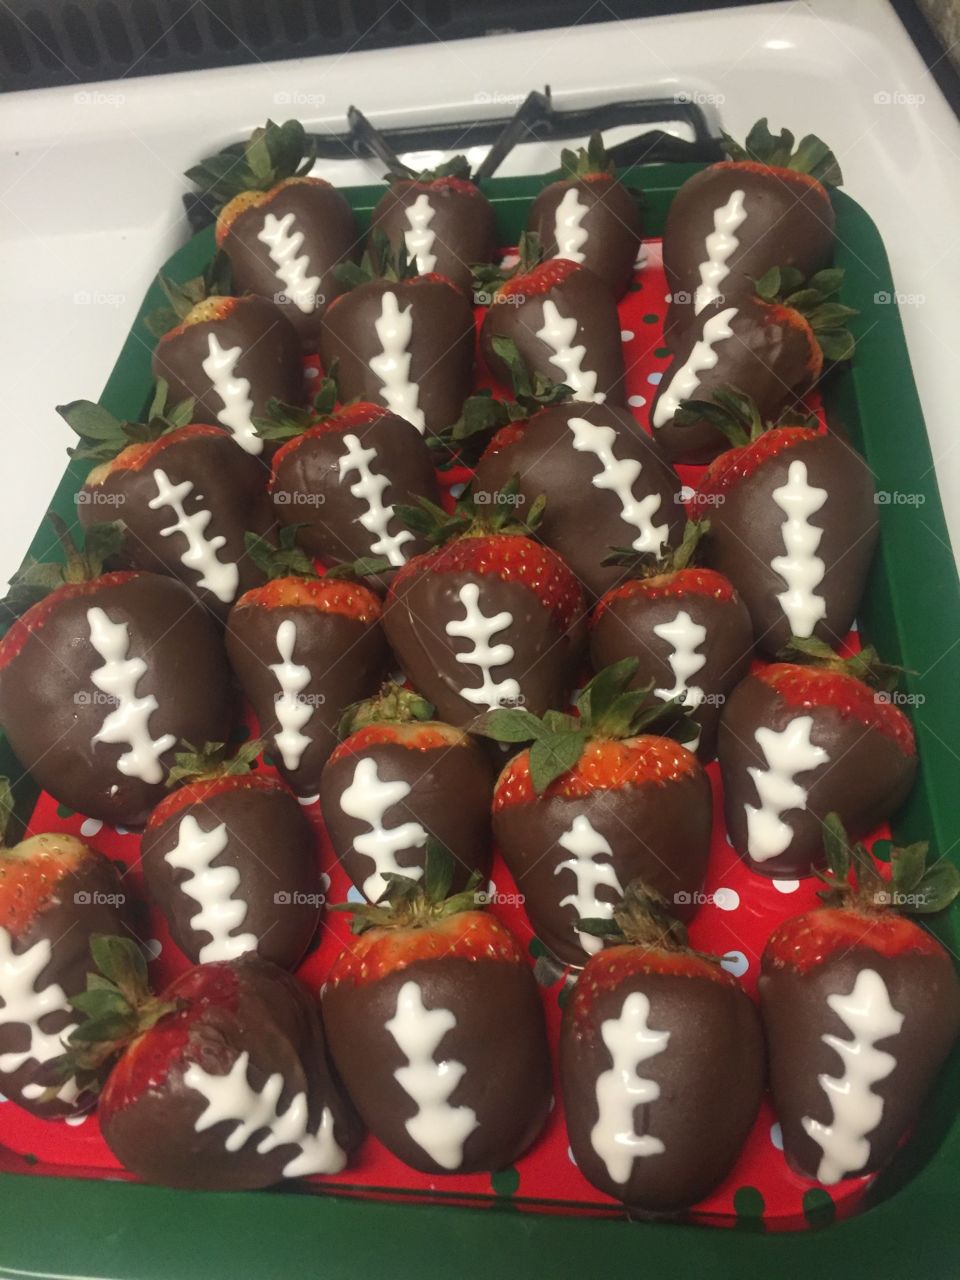 Chocolate covered strawberry footballs